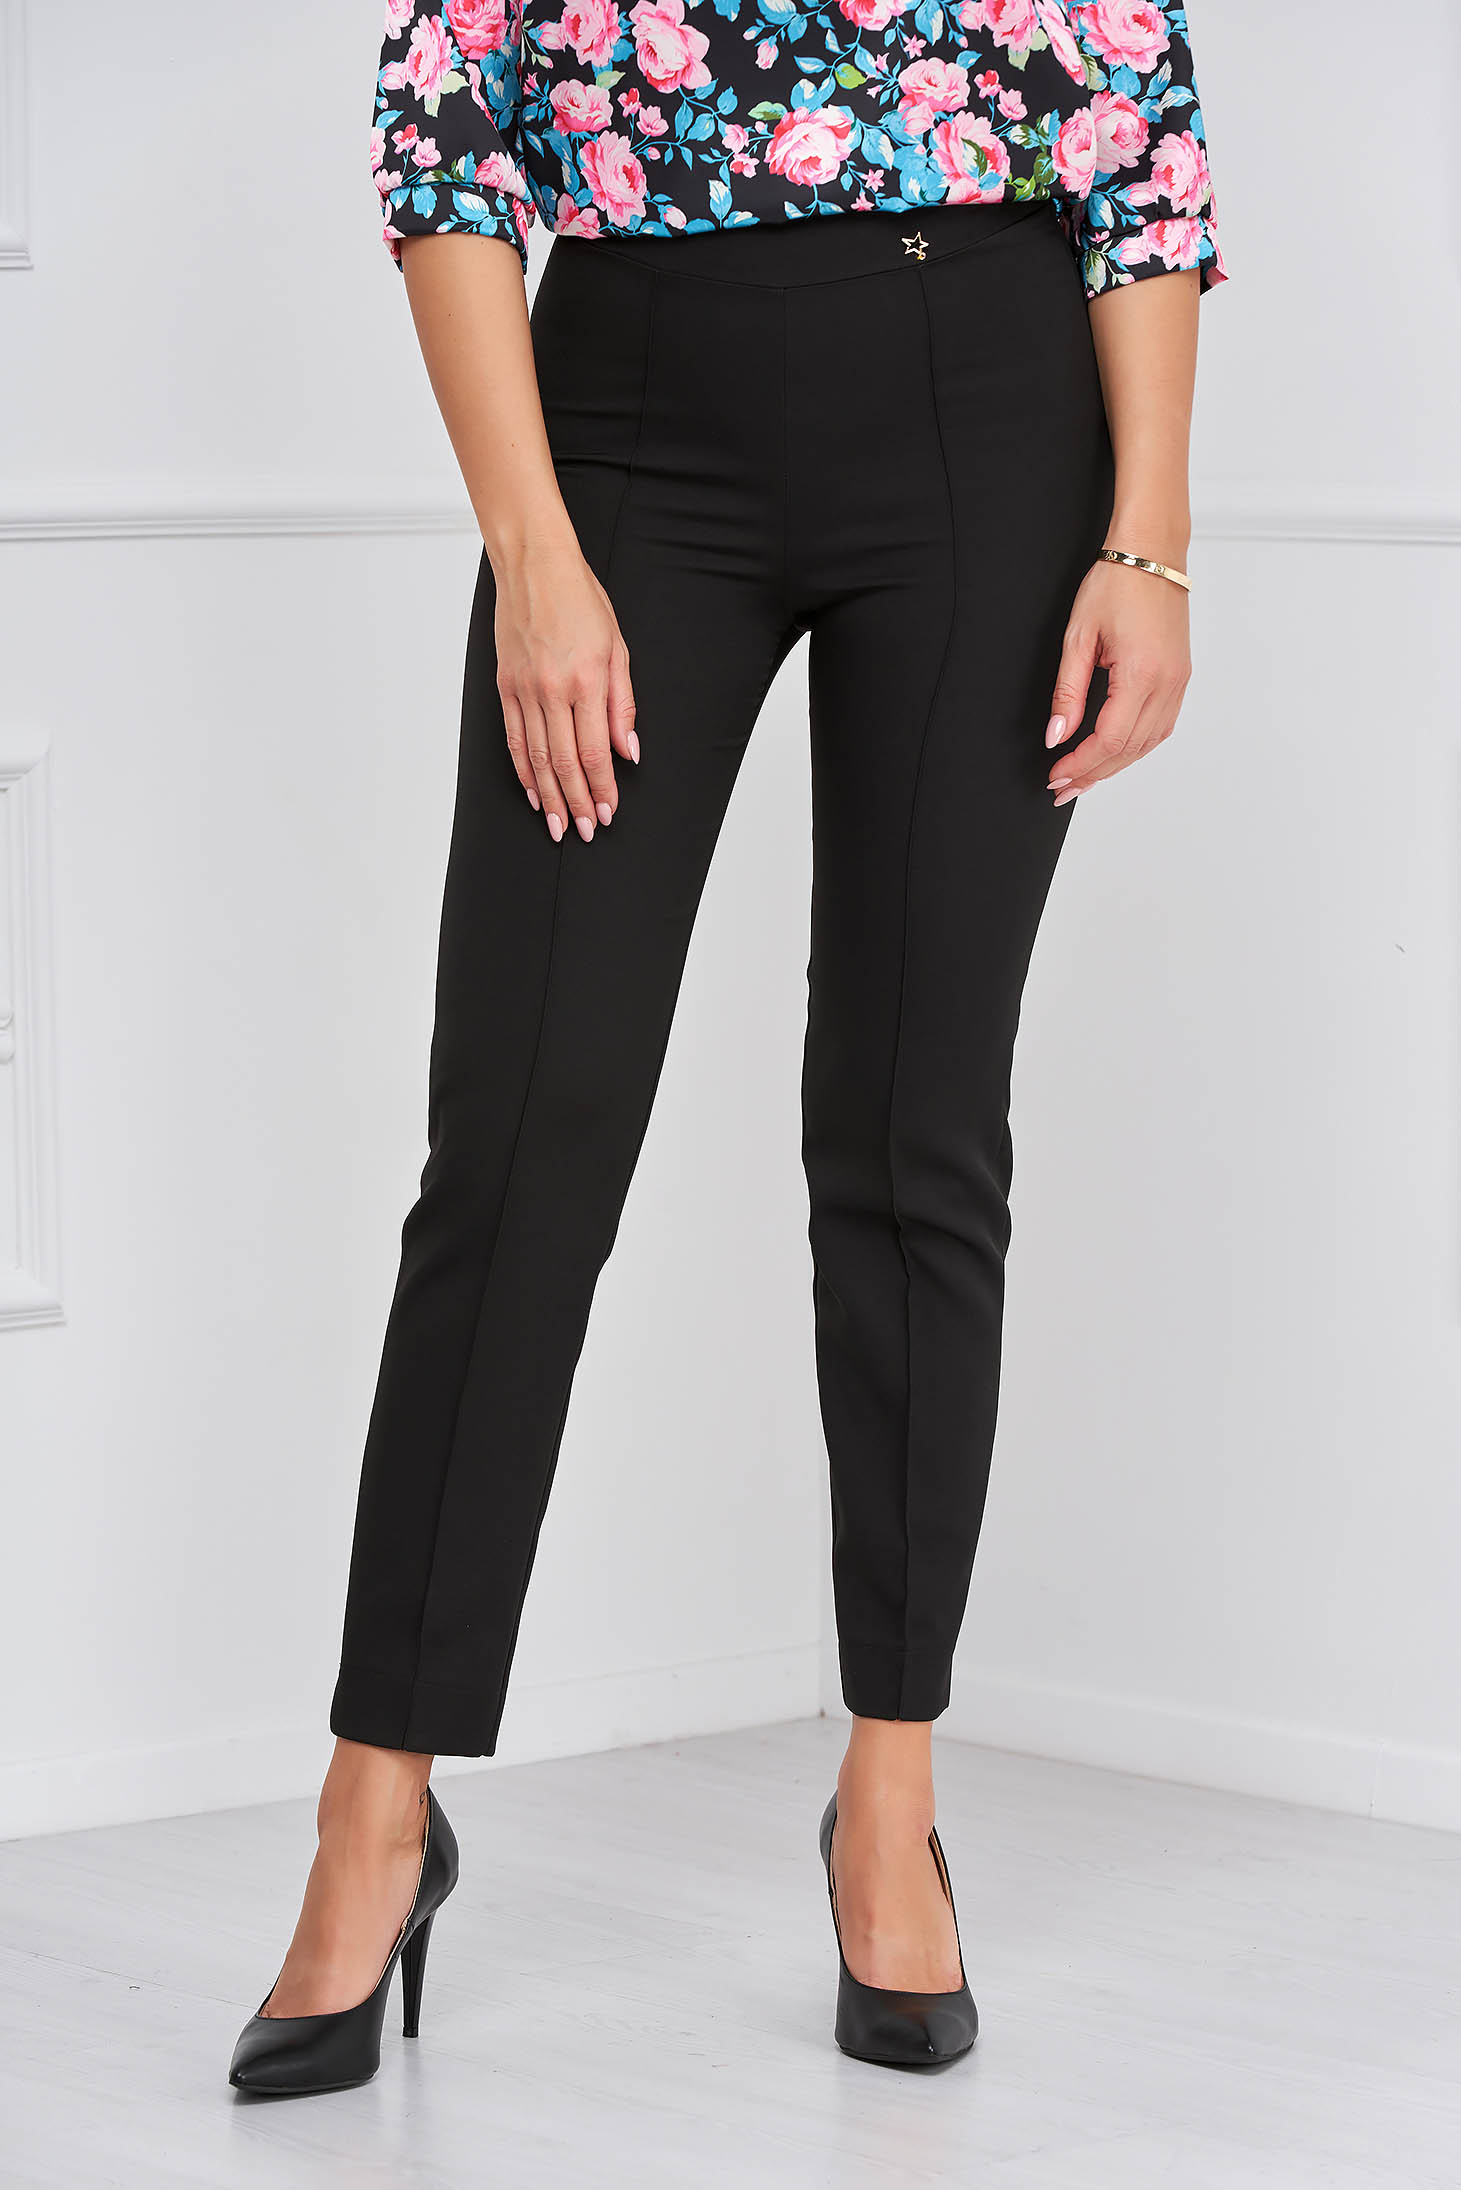 StarShinerS black trousers office high waisted slightly elastic fabric with pockets conical